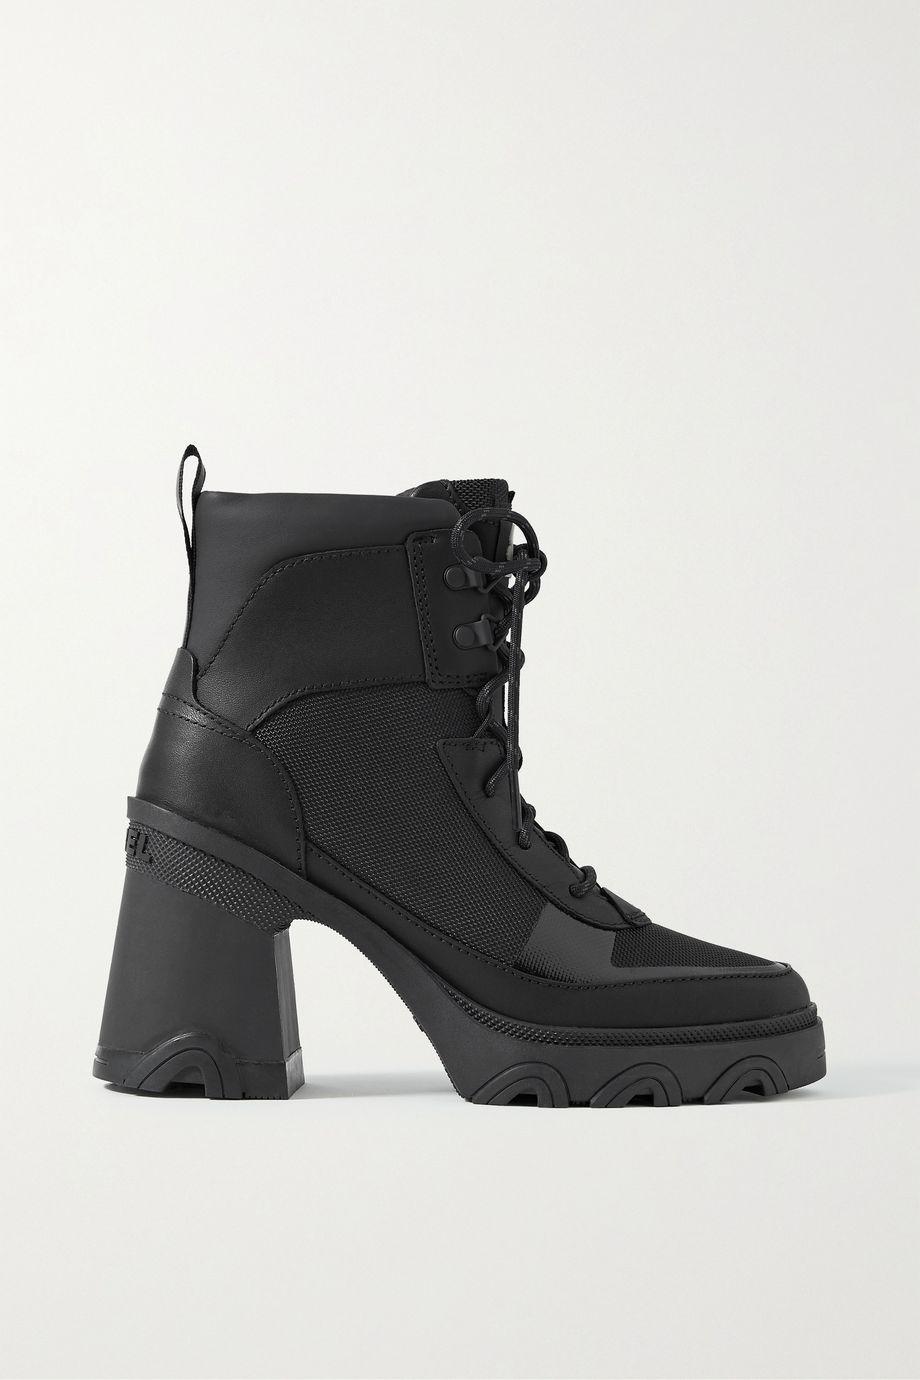 Brex Heel leather and mesh ankle boots by SOREL